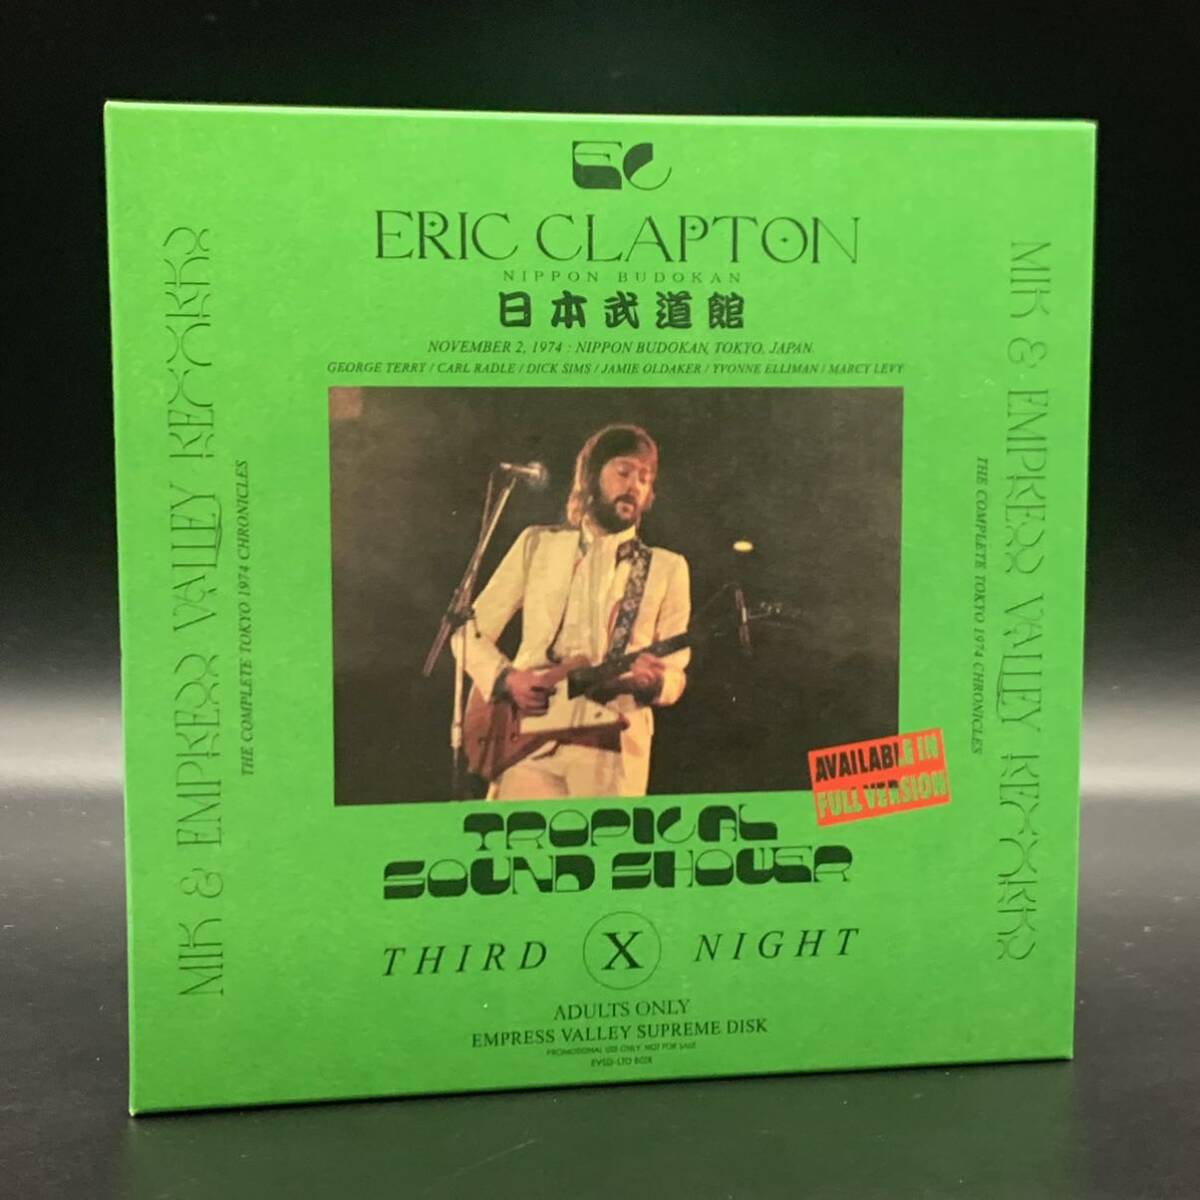 ERIC CLAPTON / TROPICAL SOUND SHOWER「亜熱帯武道館」(6CD BOX with Booklet) 初来日武道館3公演を全て初登場音源で収録した凄いやつ！の画像7